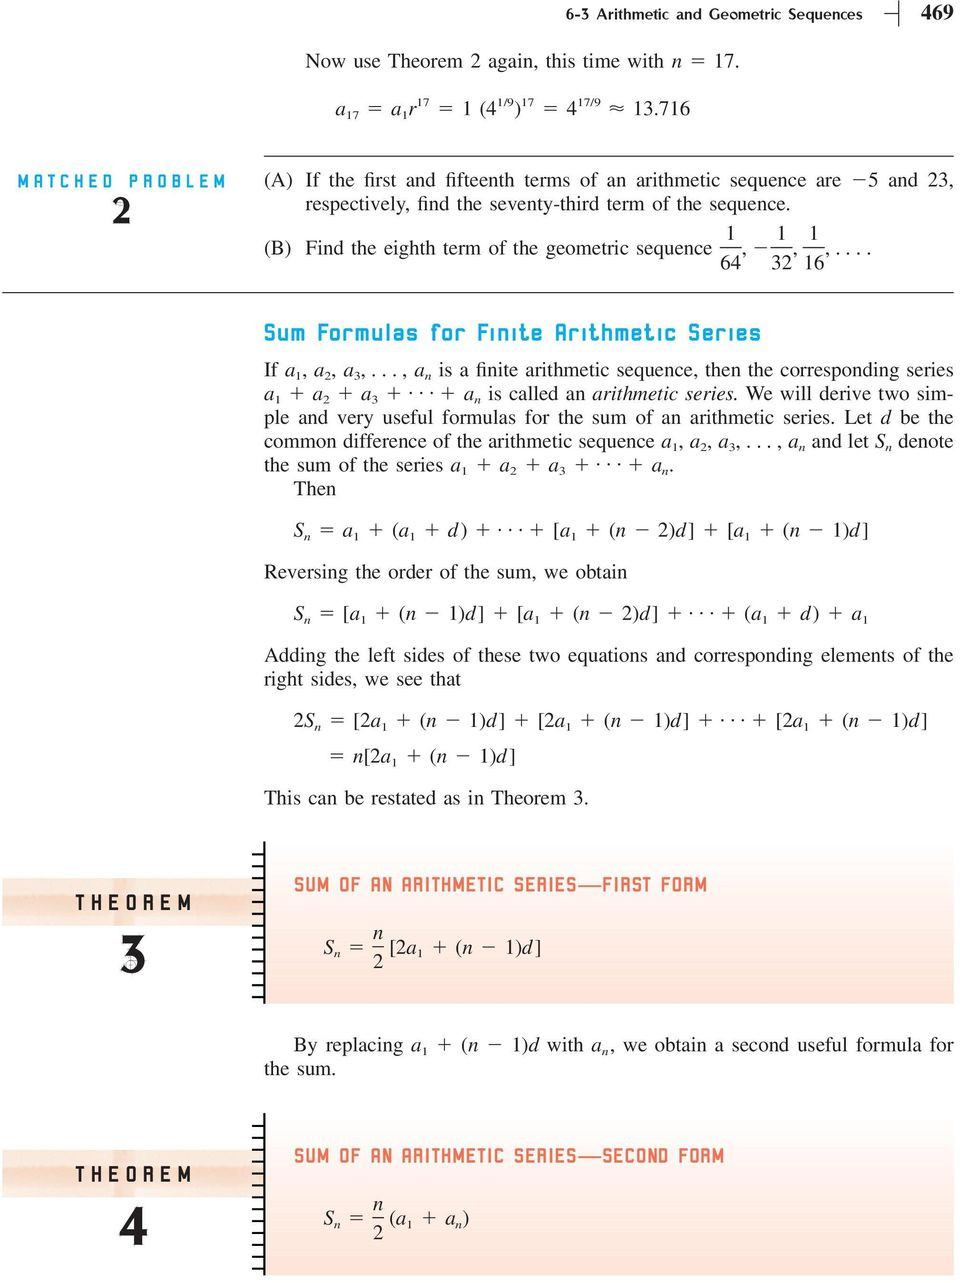 Arithmetic and Geometric Sequences Worksheet Section 6 3 Arithmetic and Geometric Sequences Pdf Free